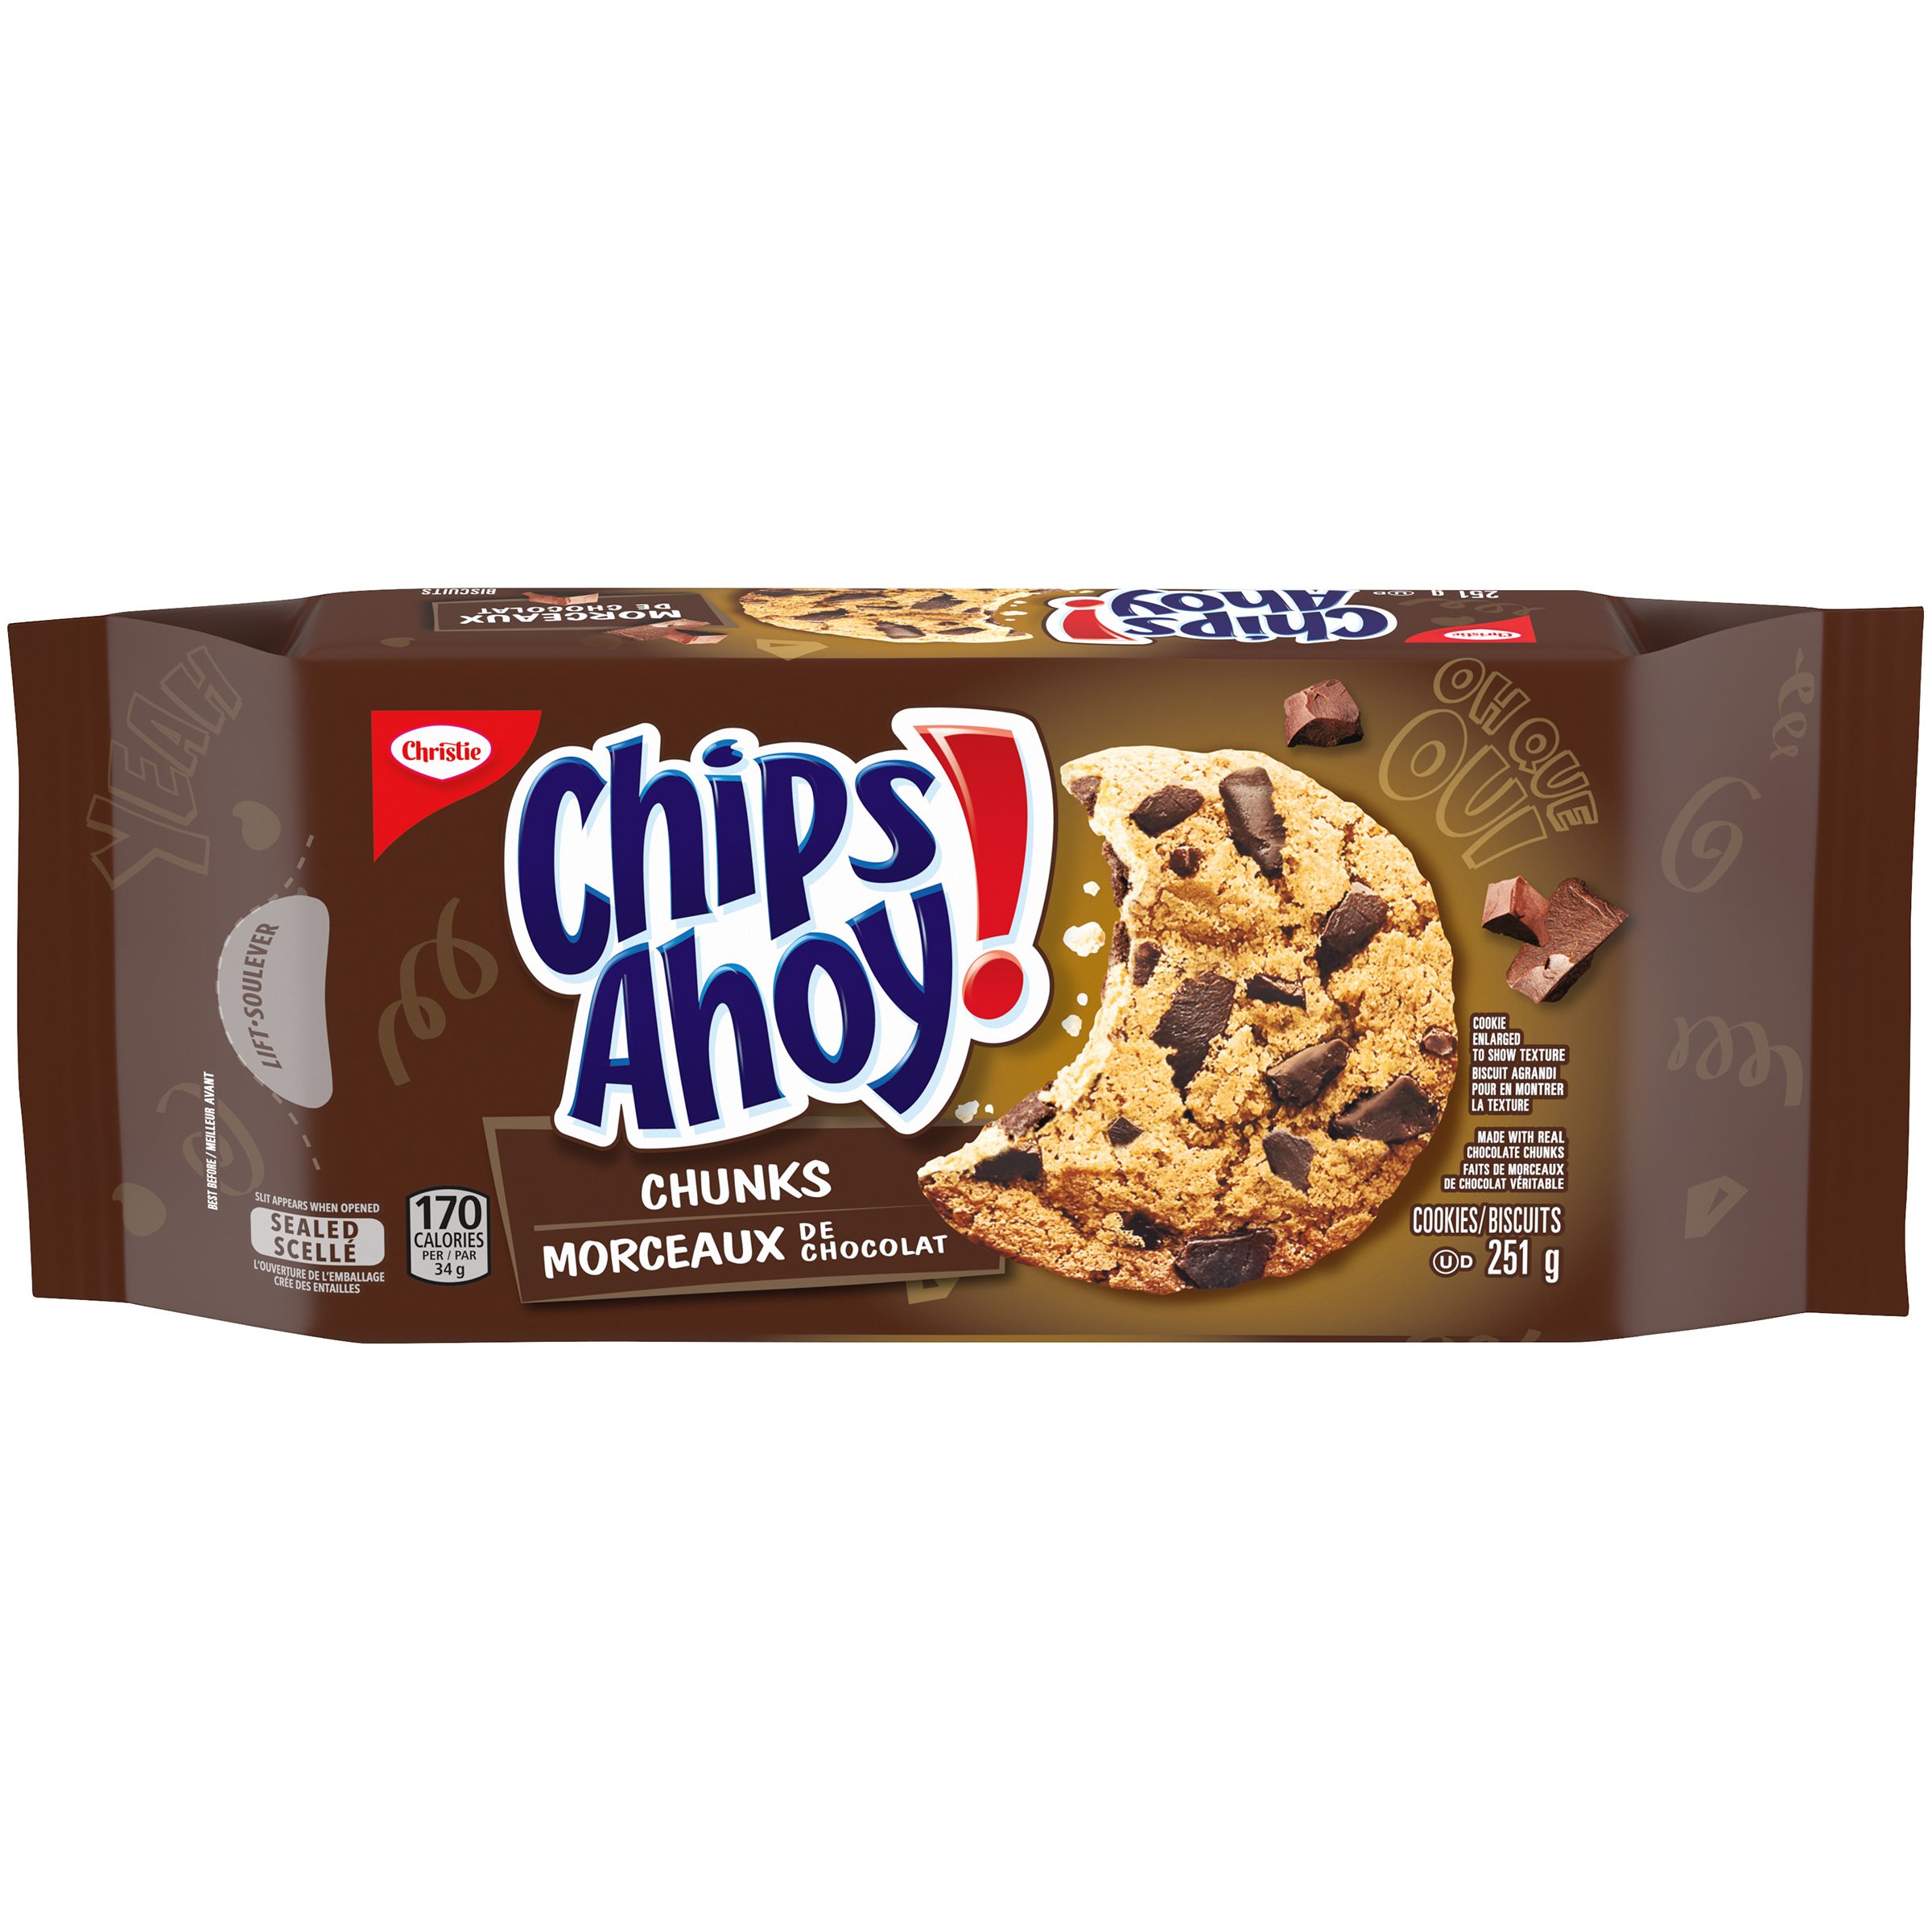 CHIPS AHOY! Chunks Chocolate Chip Cookies 251g-2